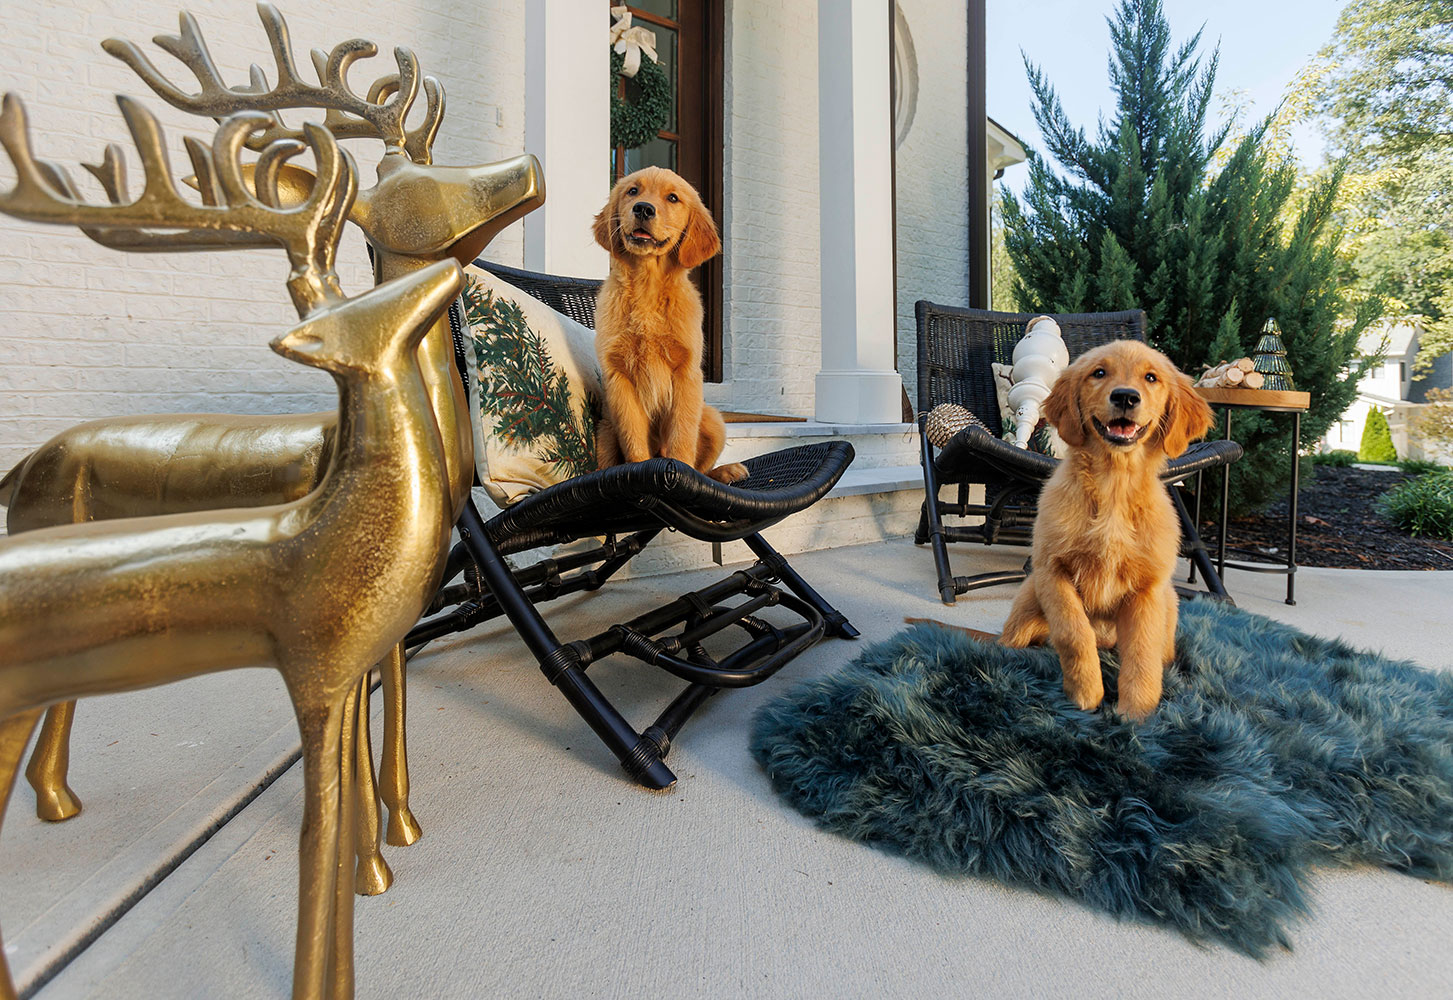 A SANCTUARY FOR BARE FEET: A plush rug creates warmth and comfort and anchors the overall design. Teal — a trending hue this holiday season — introduces a vibrant splash of color and unifies the front porch.